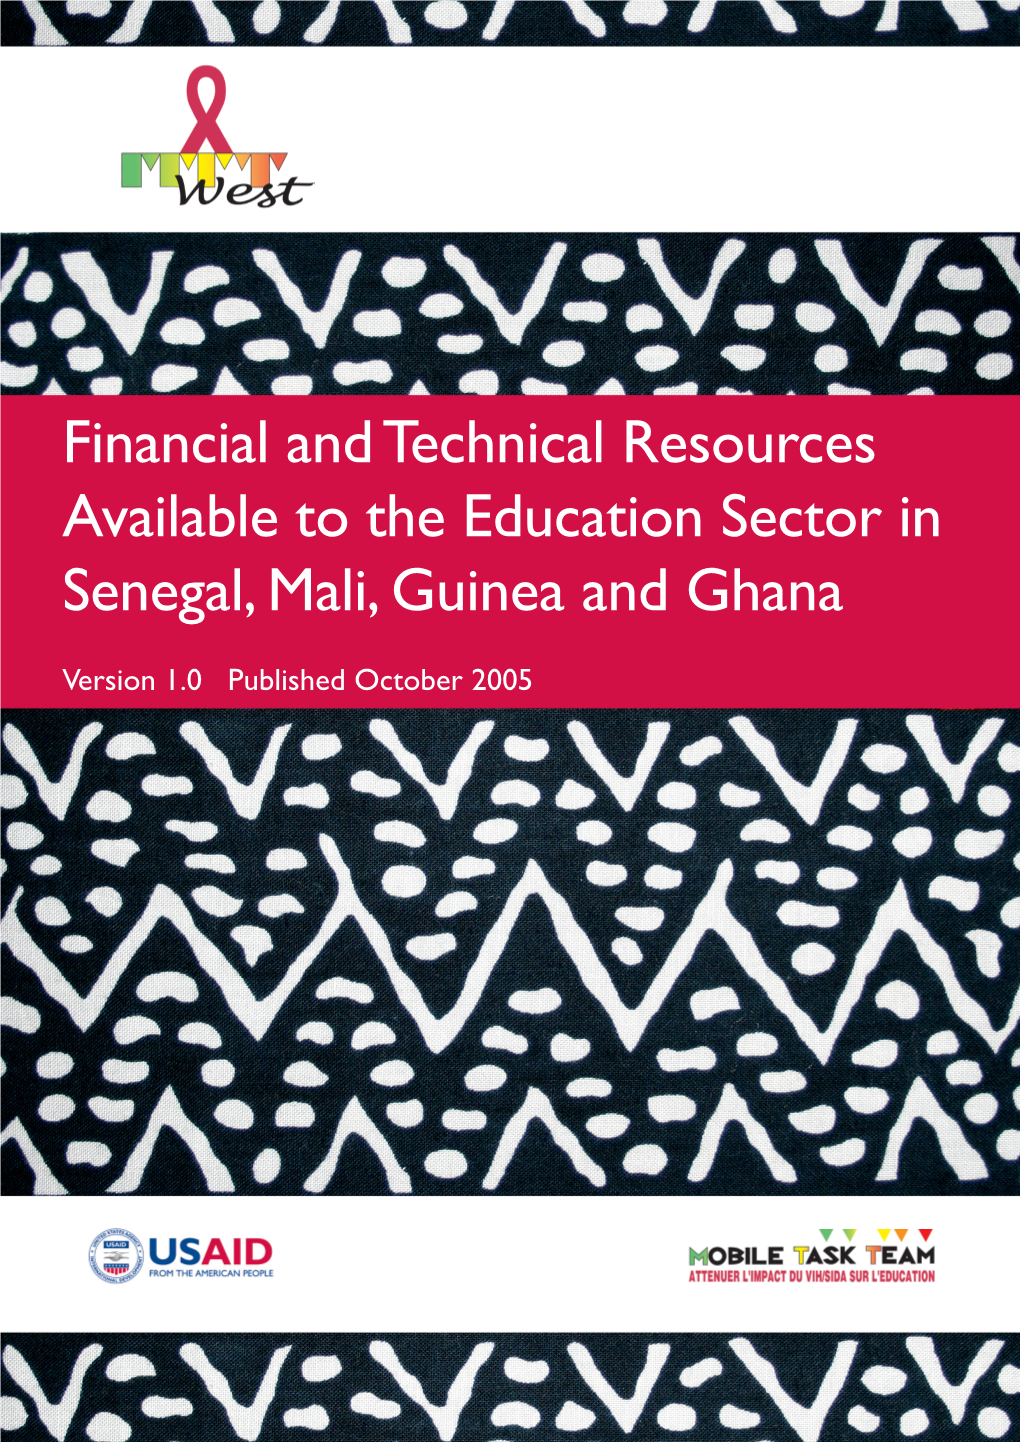 Financial and Technical Resources Available to the Education Sector in Senegal, Mali, Guinea and Ghana